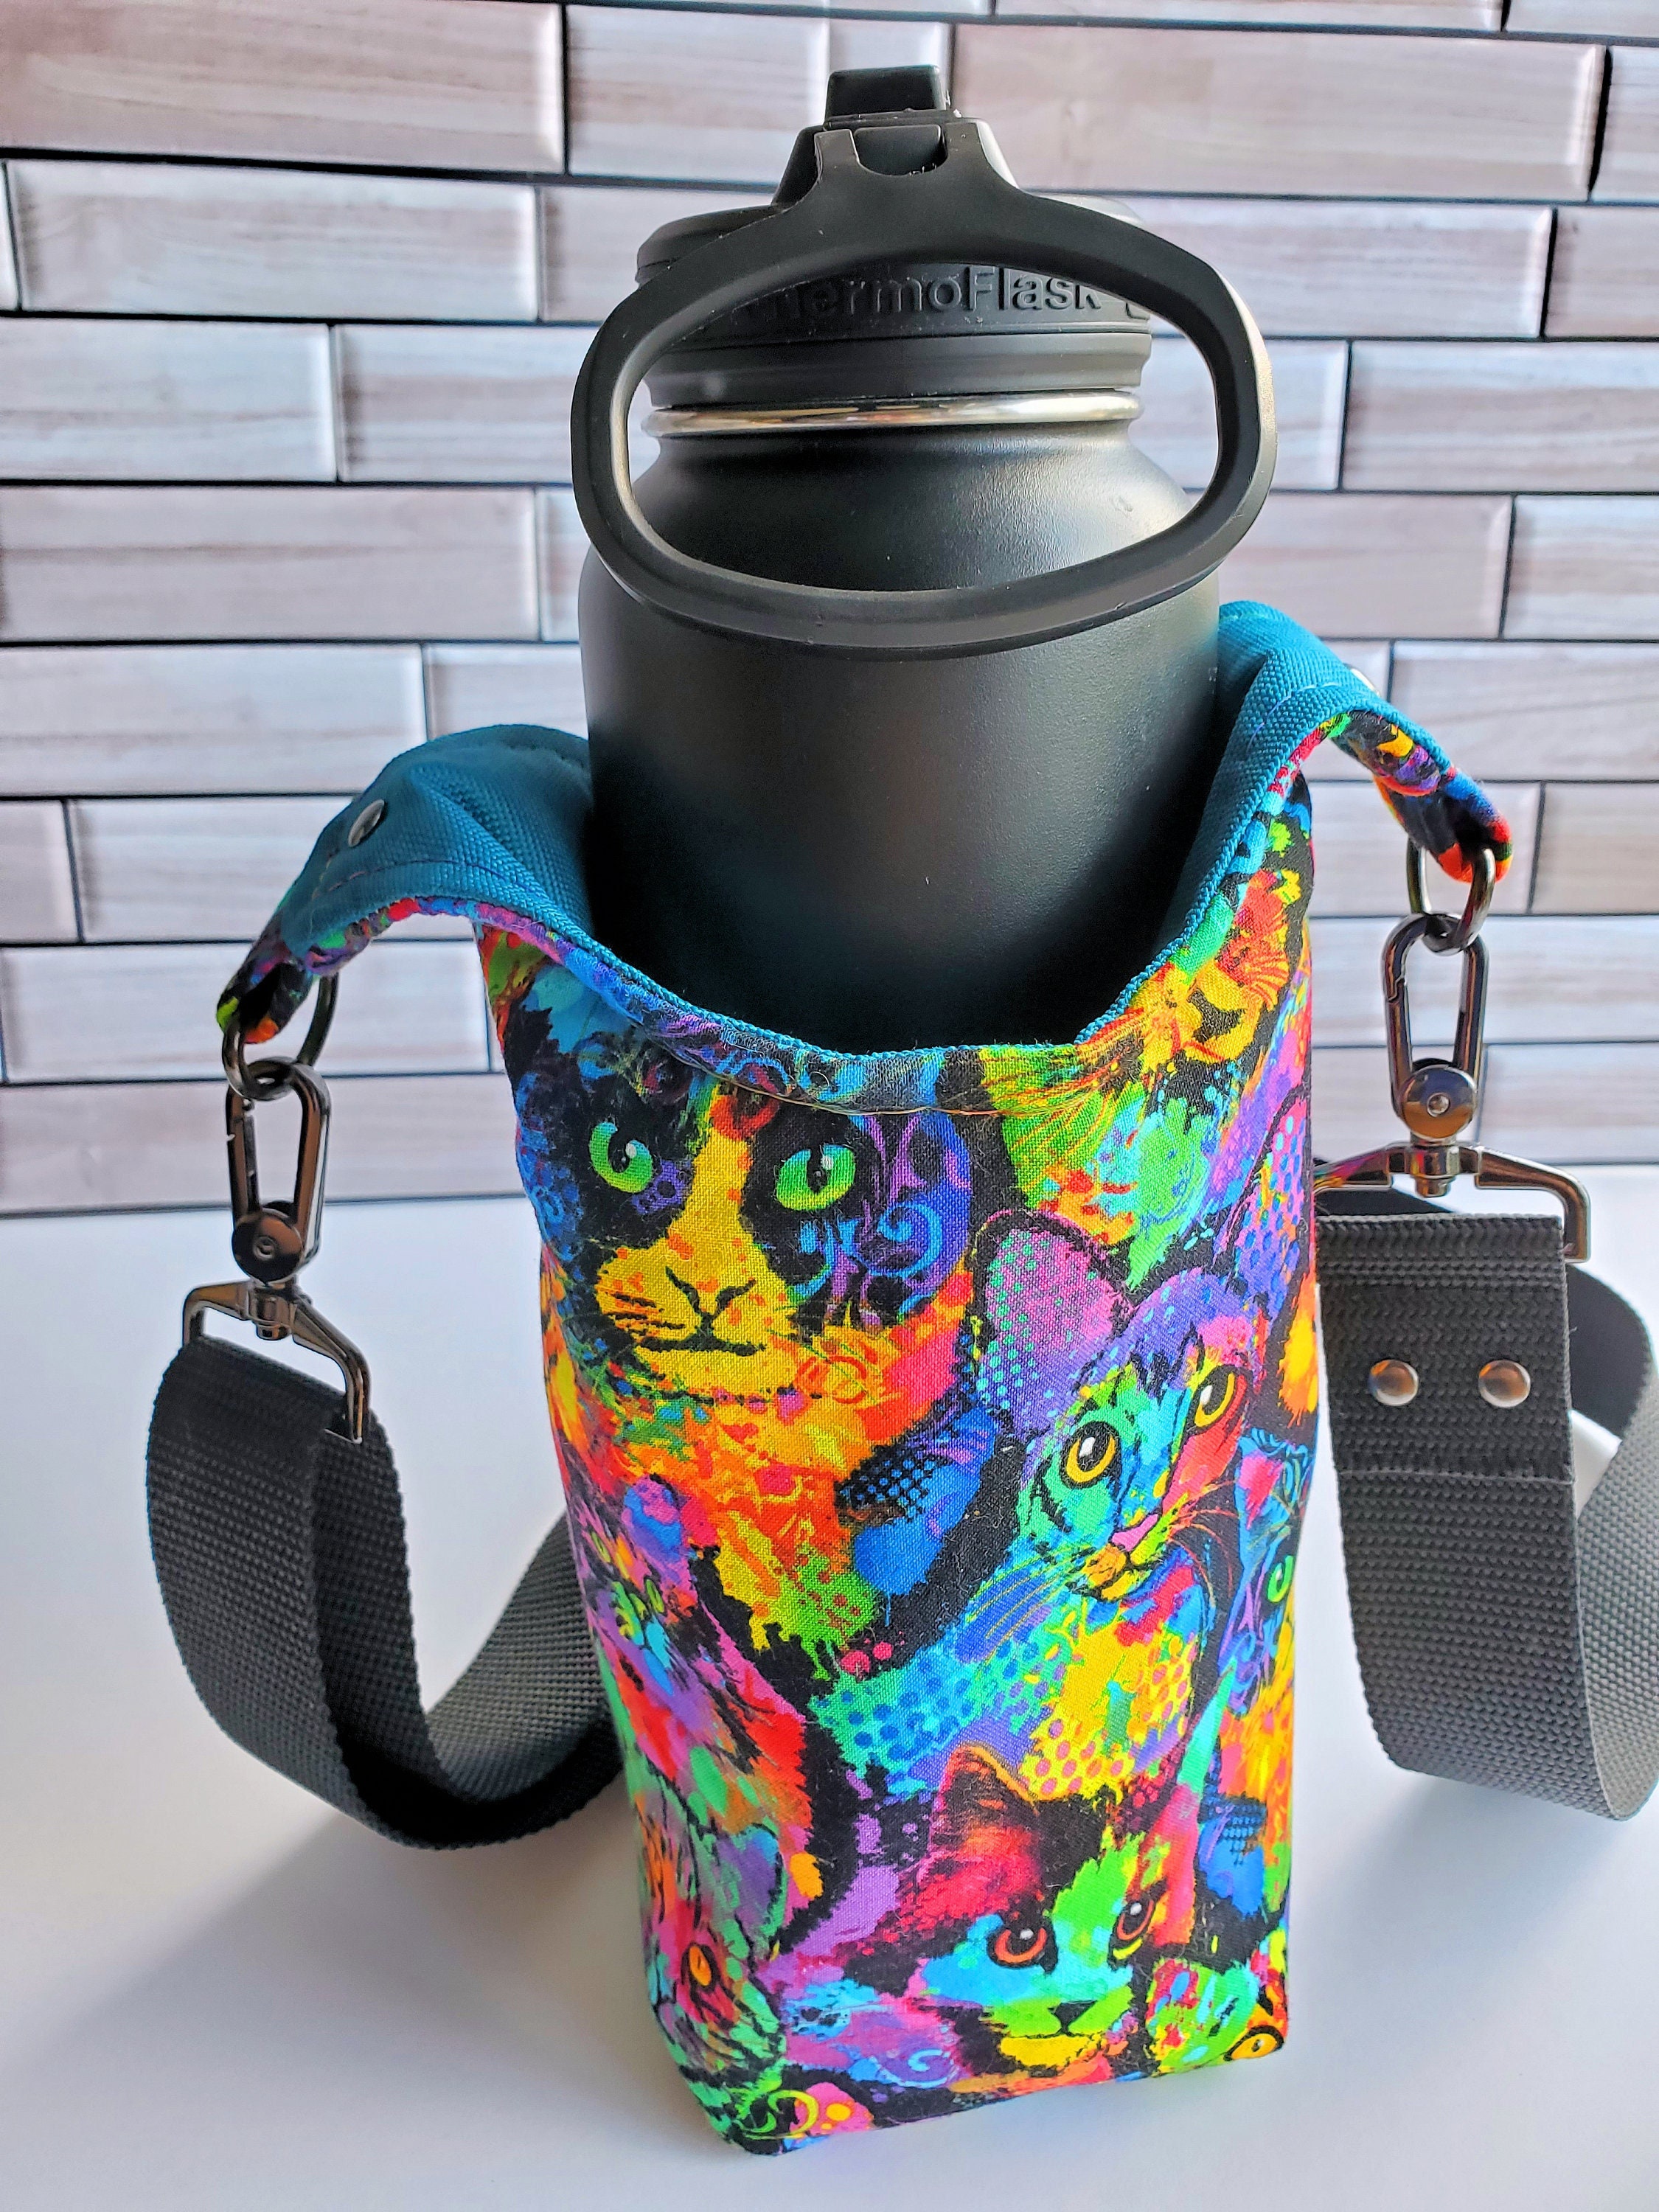 Momo Lifestyle Gallon Jug Sleeve Reversible Double Sided 5 Gallon Water Jug Cover Insulated Neoprene Water Bottle Sleeve for Gallon Water Dispenser